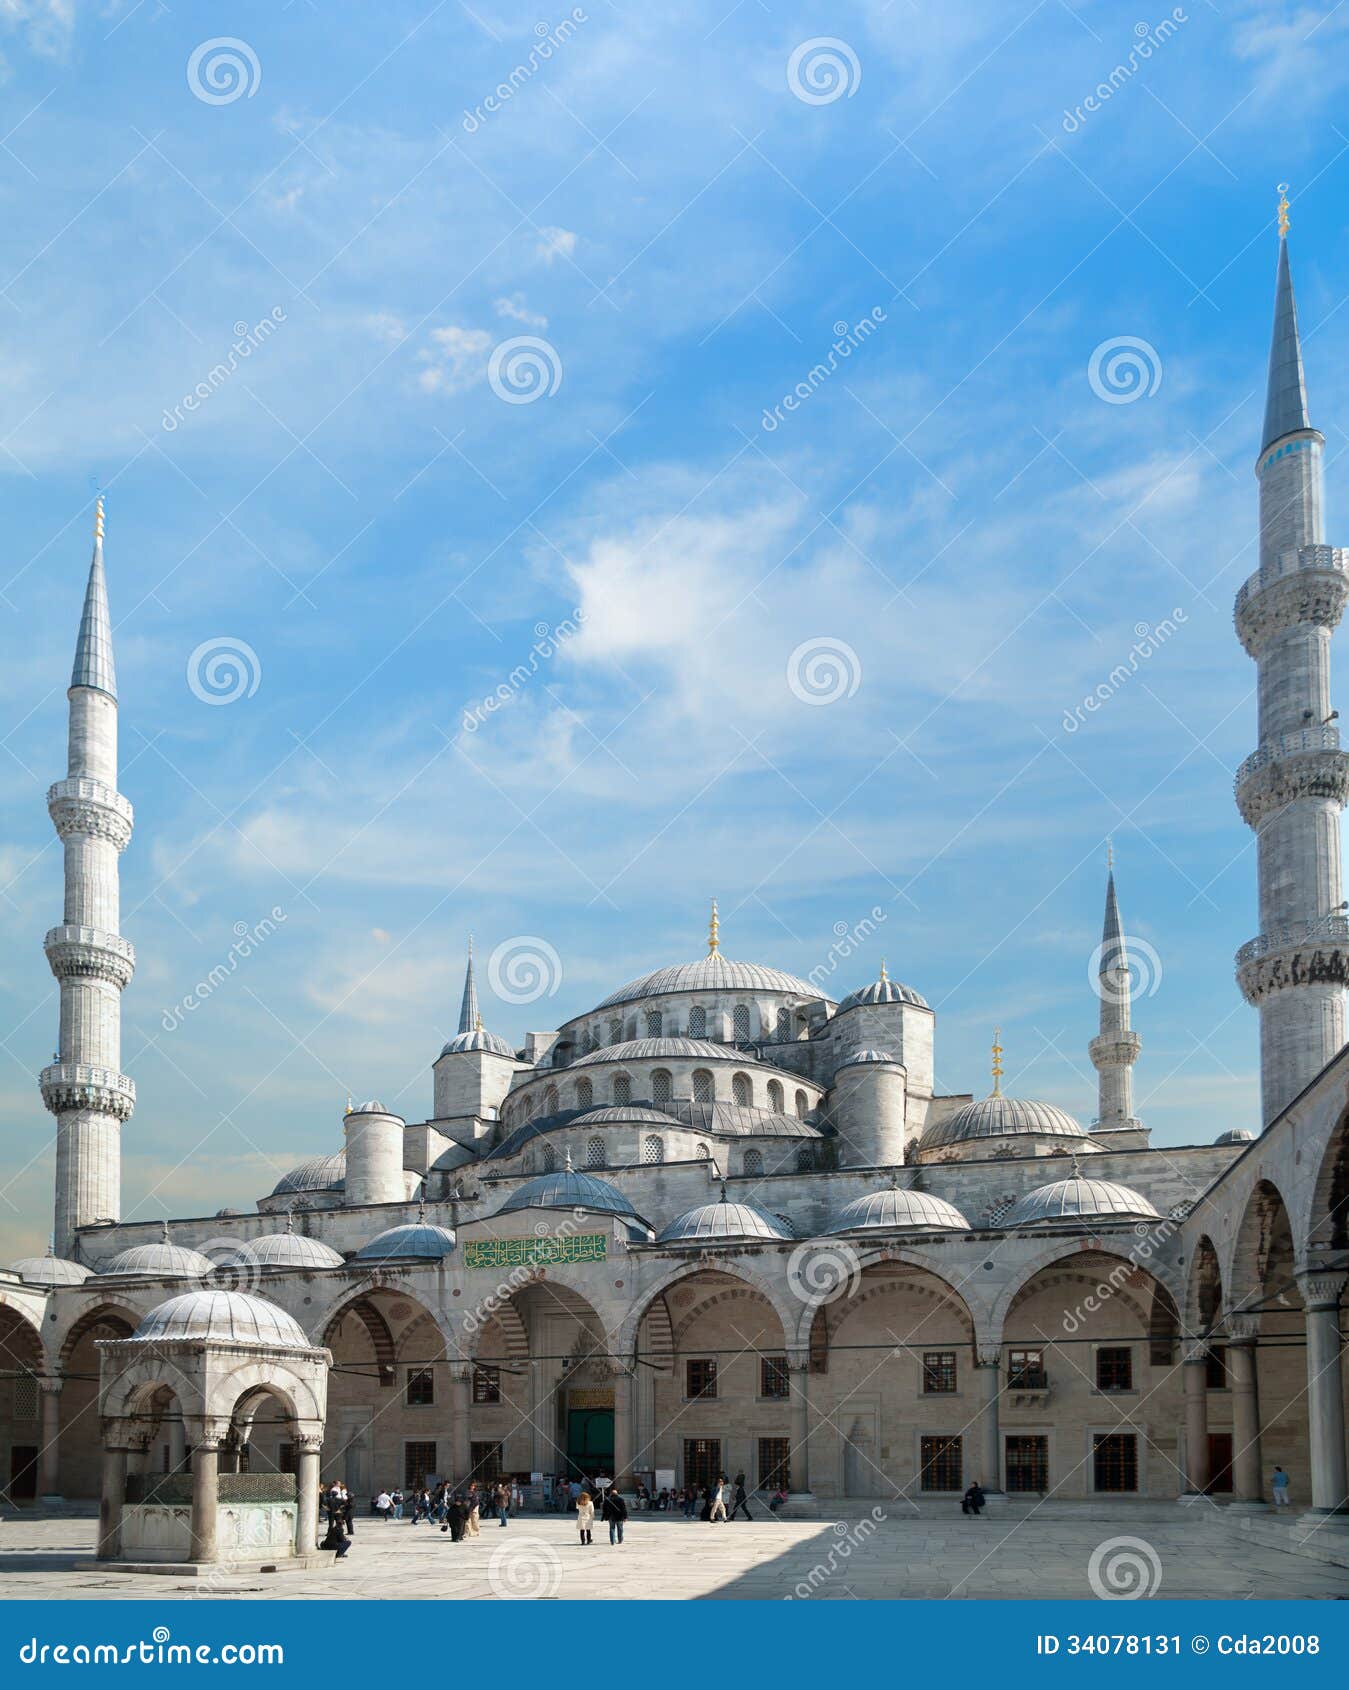 the sultan ahmed mosque